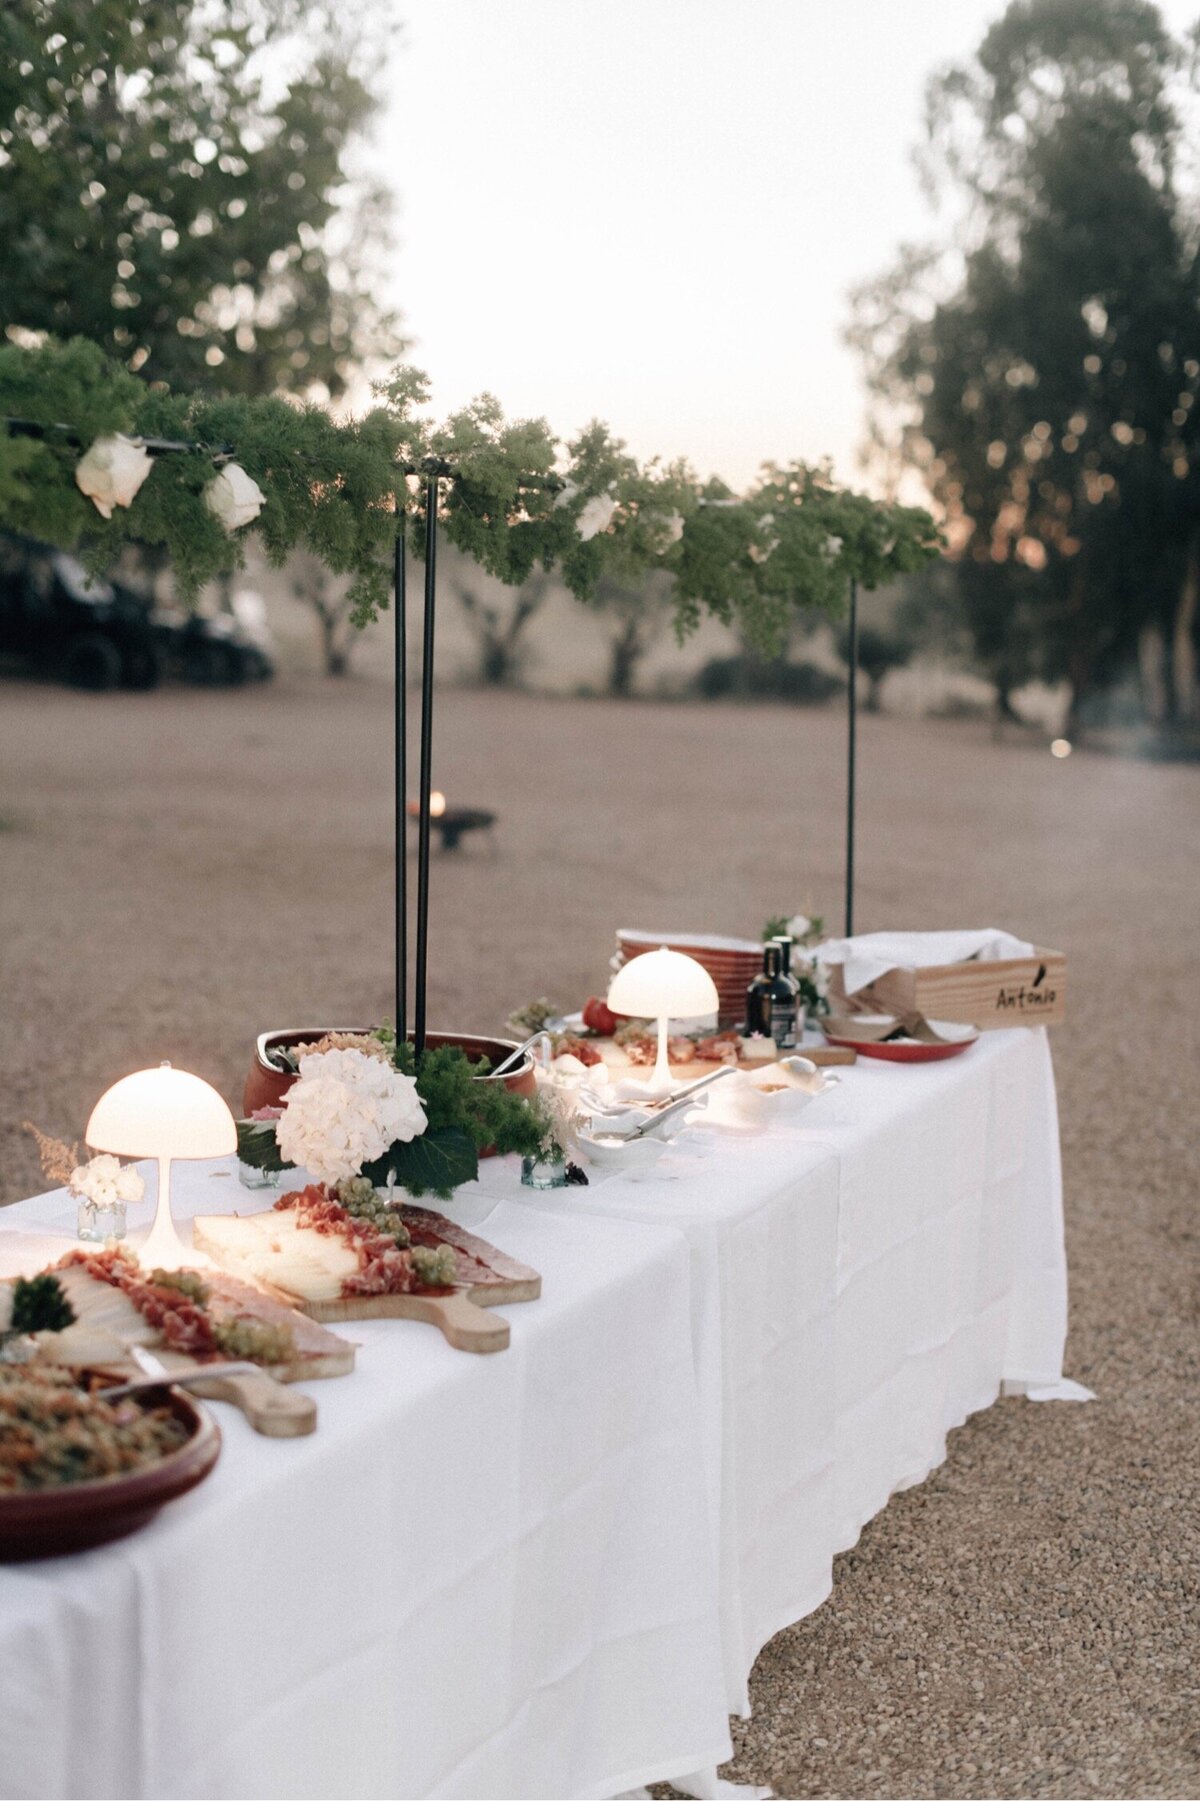 46_Flora_And_Grace_Portugal_Editorial_Wedding_Photographer Lisboa_Wedding_Photographer-296_A modern luxury wedding at Malhadina Nova in Portugal in the Alentejo region. Understated elegance and sleek aesthetic captured by Flora and Grace Photography.